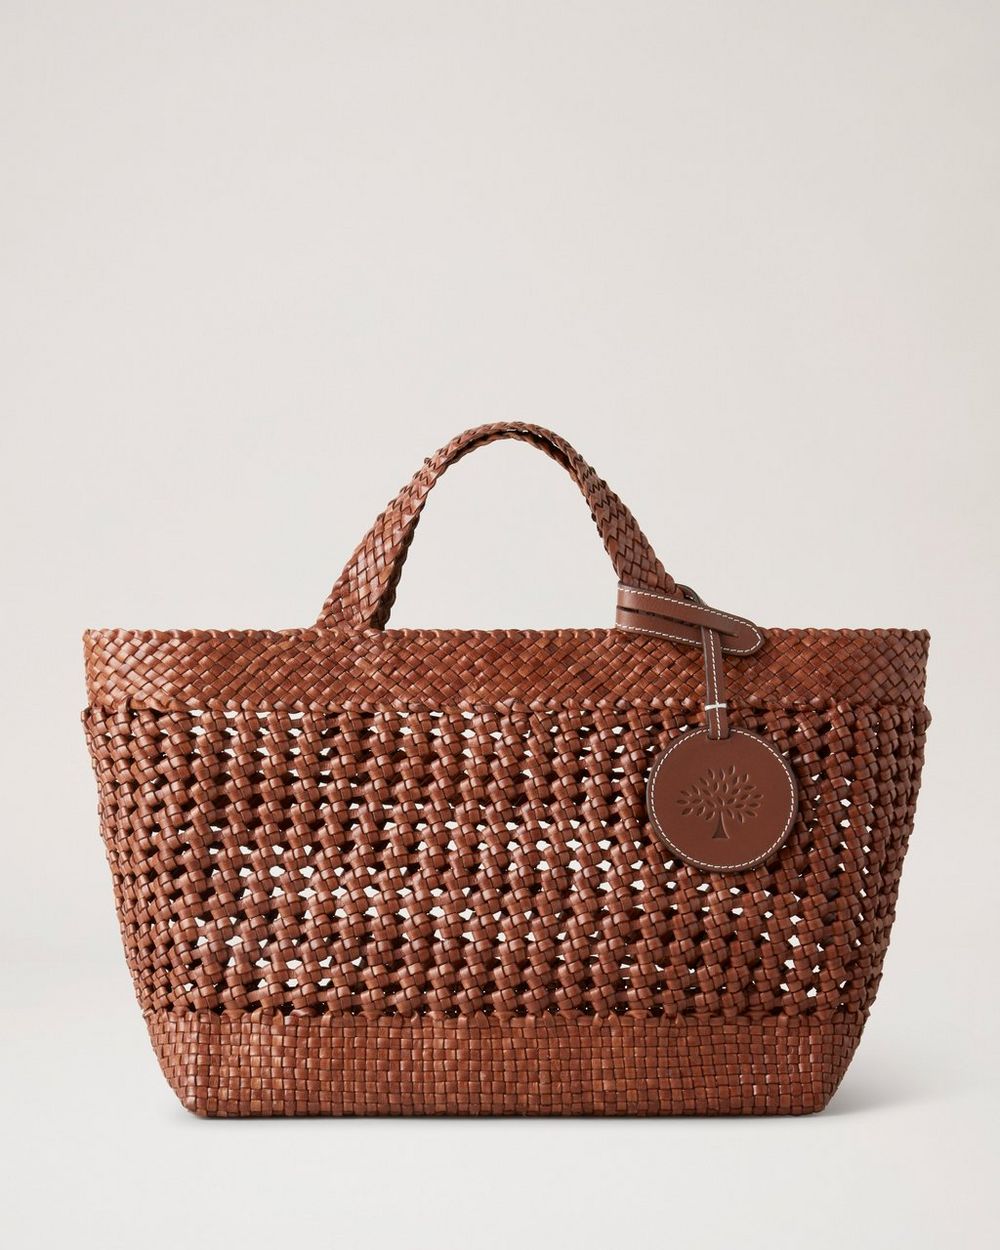 Small Woven Leather Tote | Vintage Oak Bovine Leather | Summer